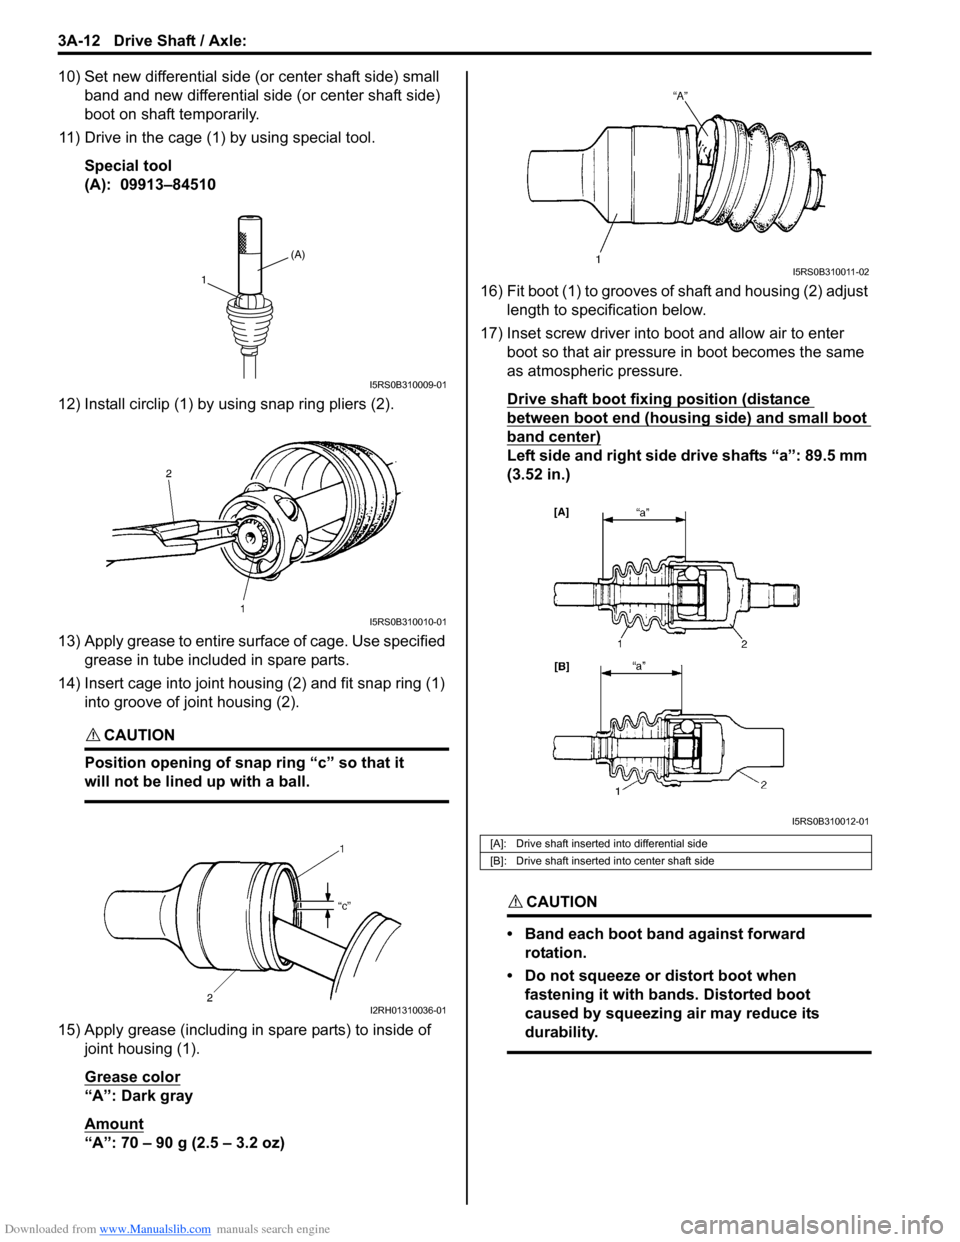 SUZUKI SWIFT 2006 2.G Service Owners Guide Downloaded from www.Manualslib.com manuals search engine 3A-12 Drive Shaft / Axle: 
10) Set new differential side (or center shaft side) small band and new differential side (or center shaft side) 
bo